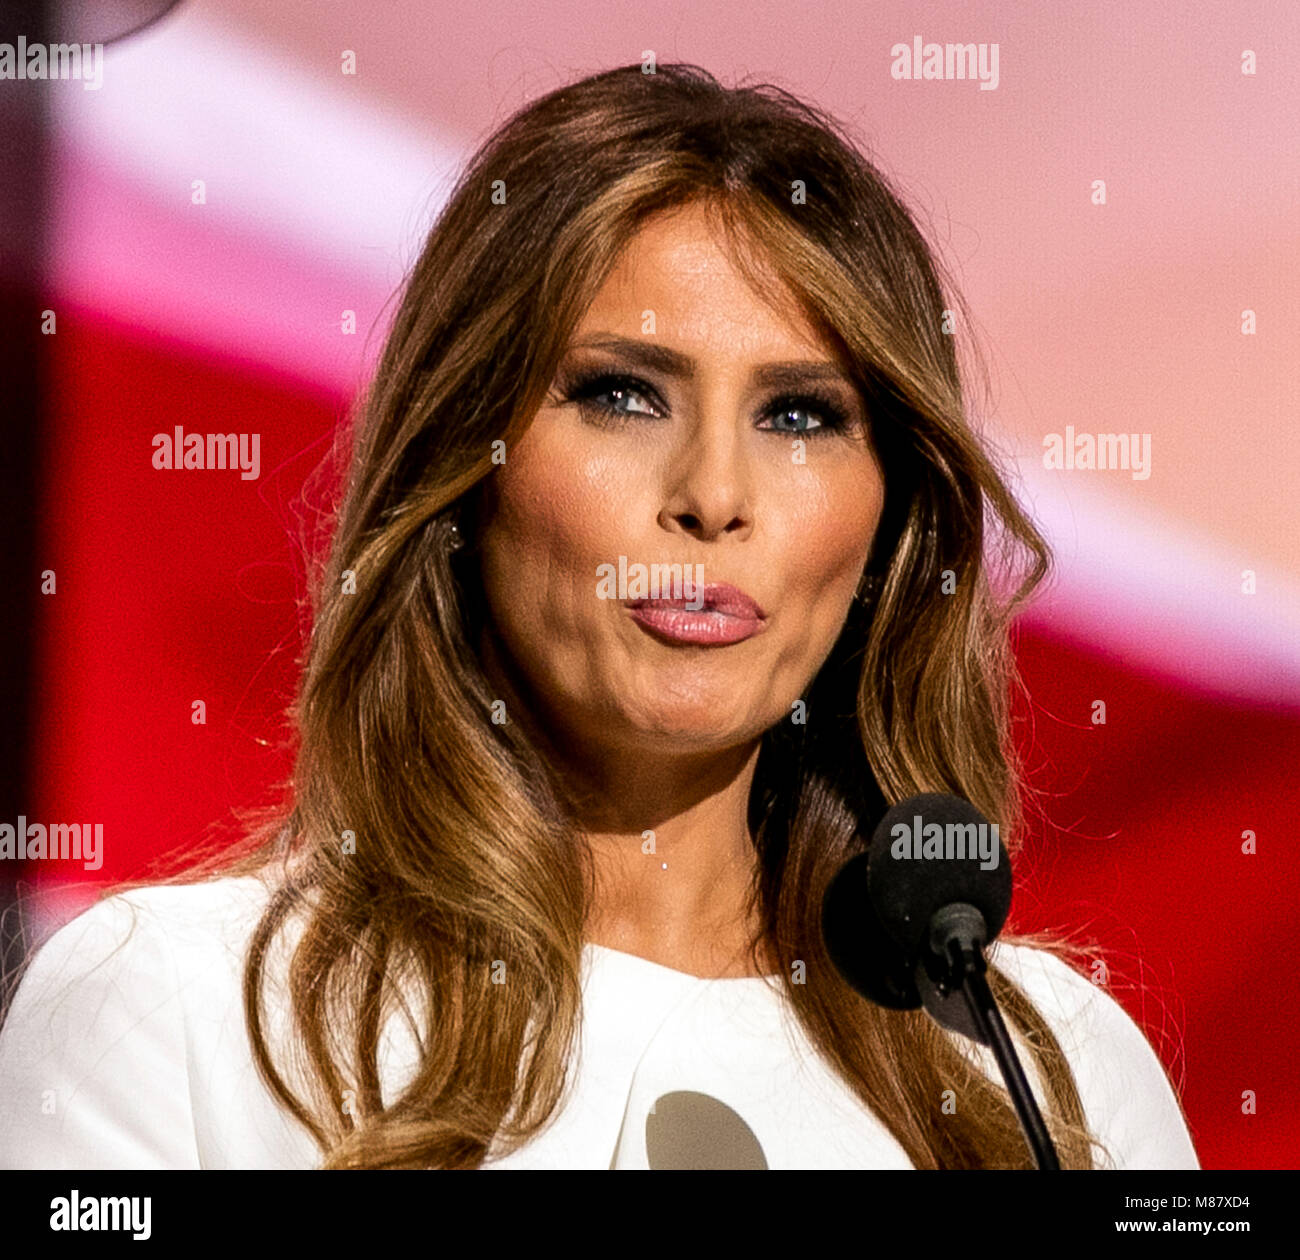 Melania trump model hi-res stock photography and images - Alamy